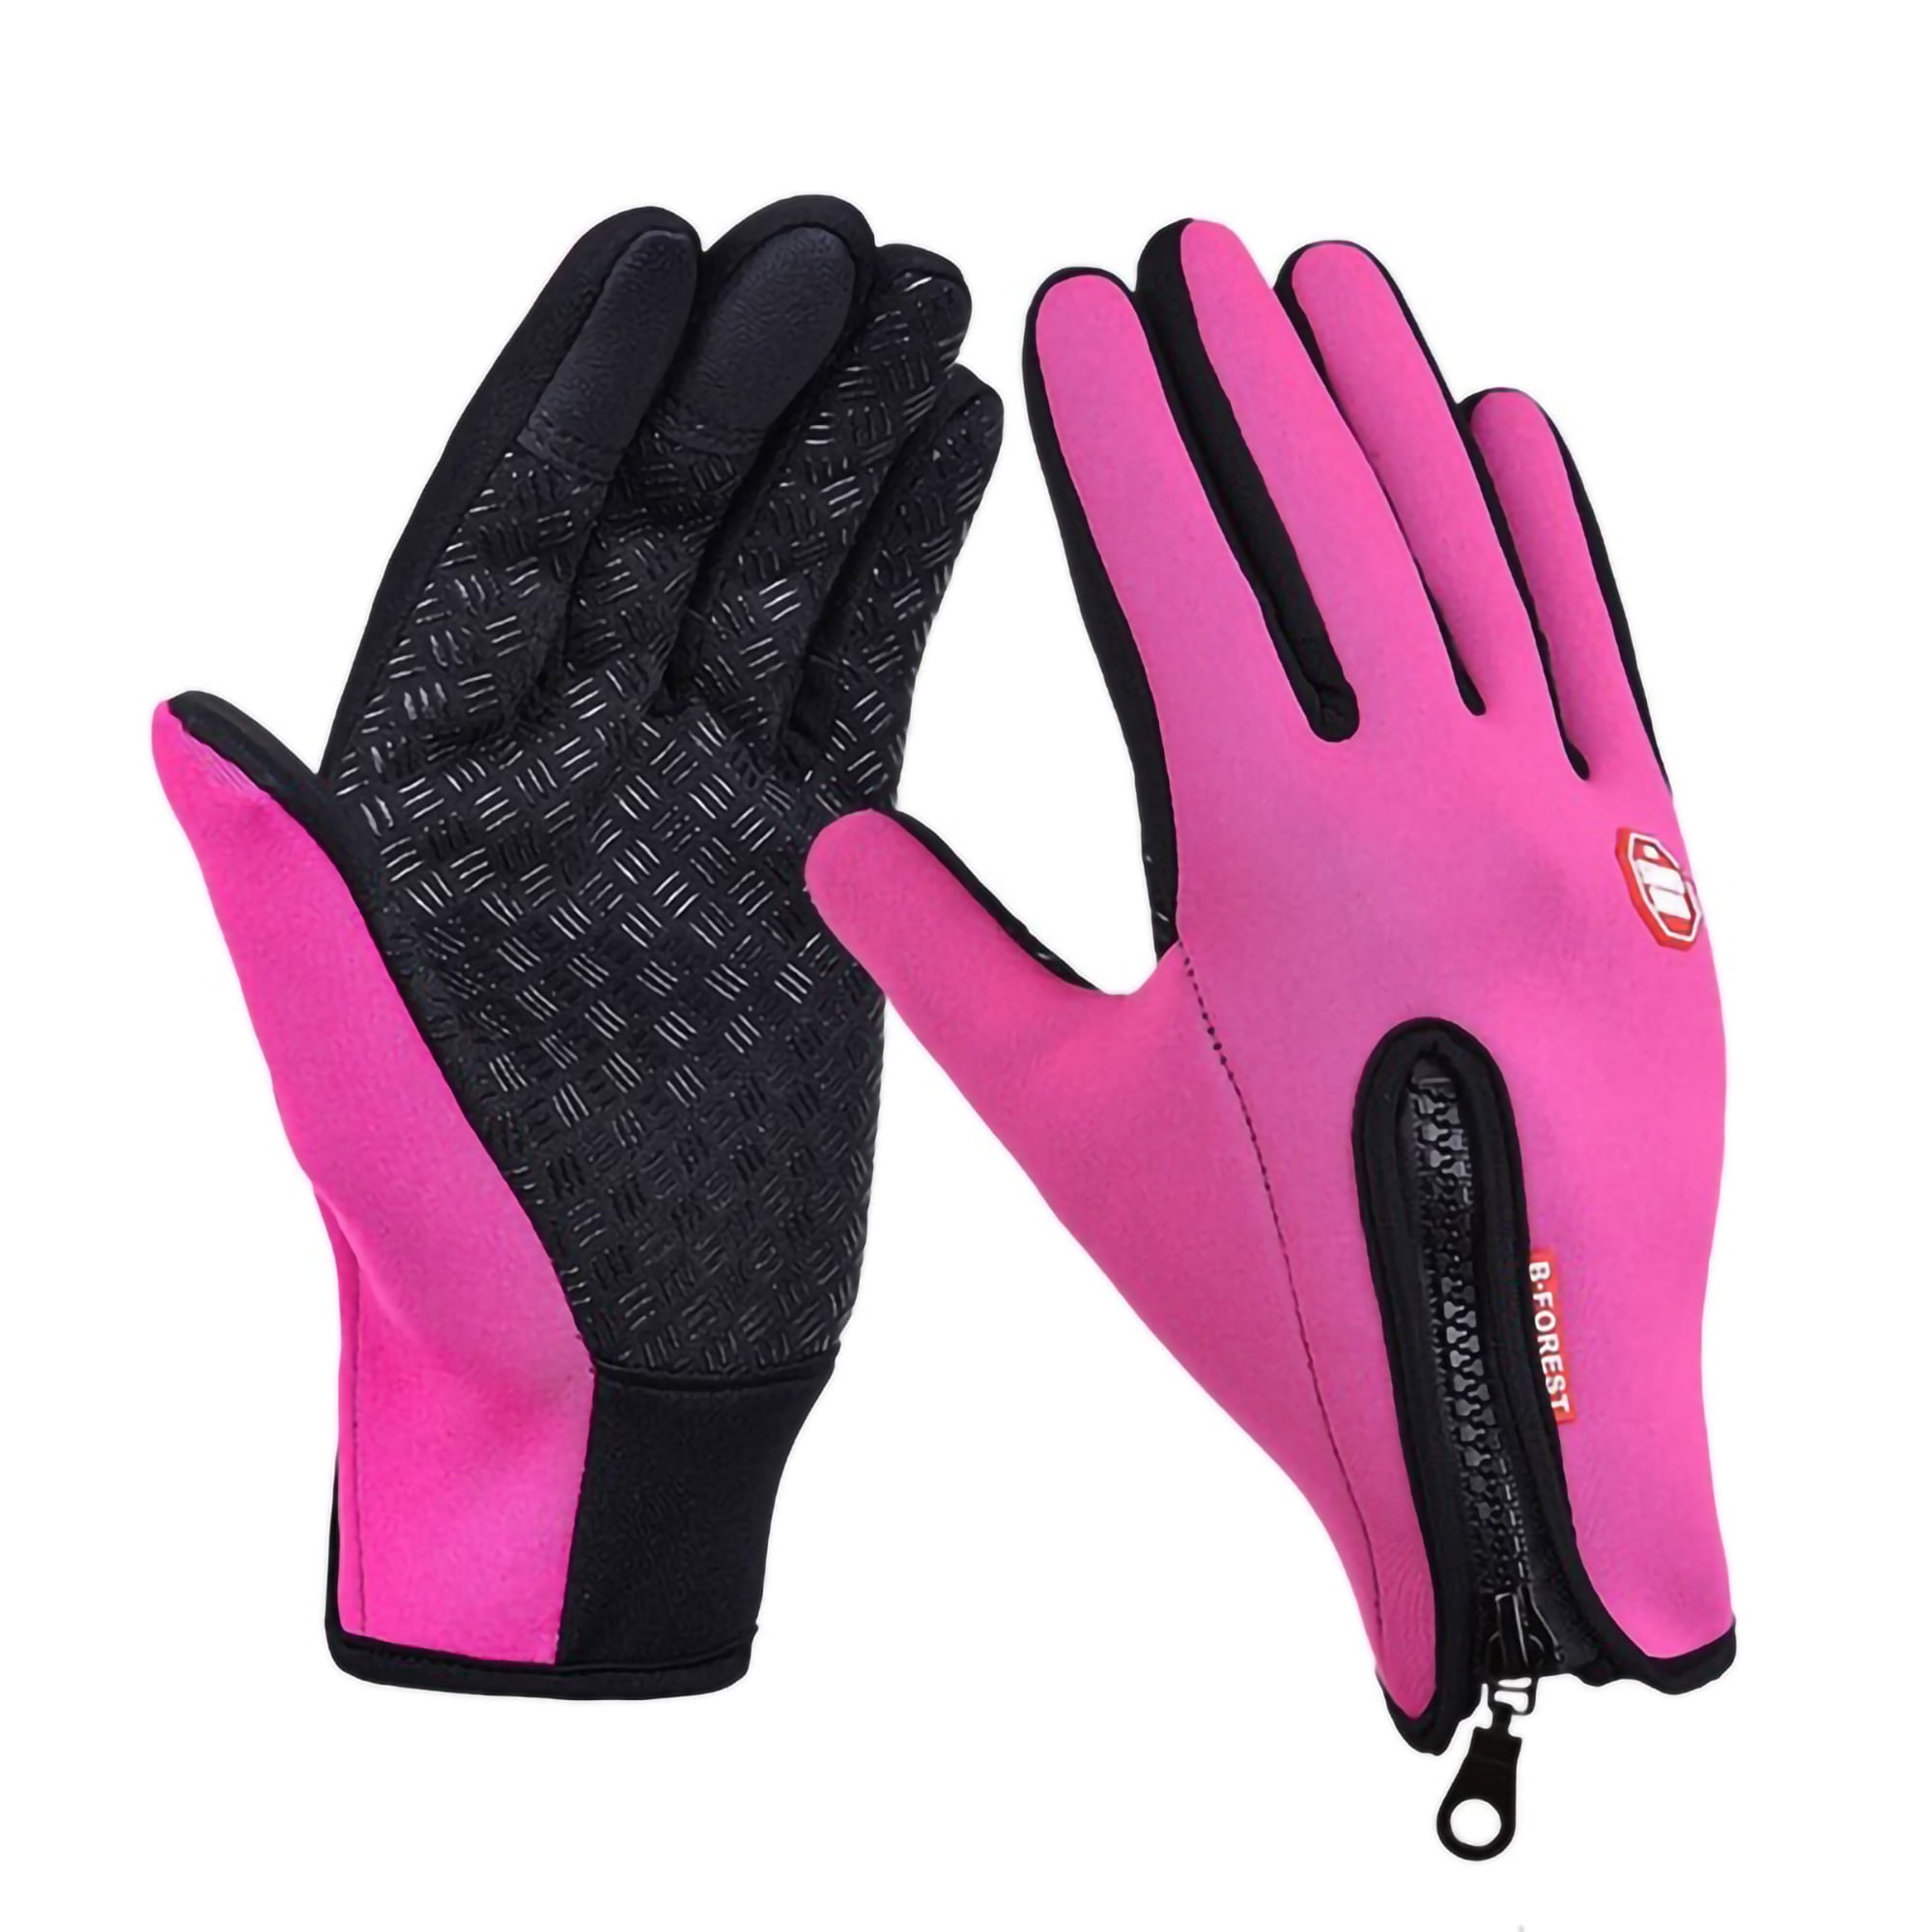 Details about   Outdoor Sports Non-slip Touch Screen Gloves Full Finger Anti Bike Bicycle Gloves 